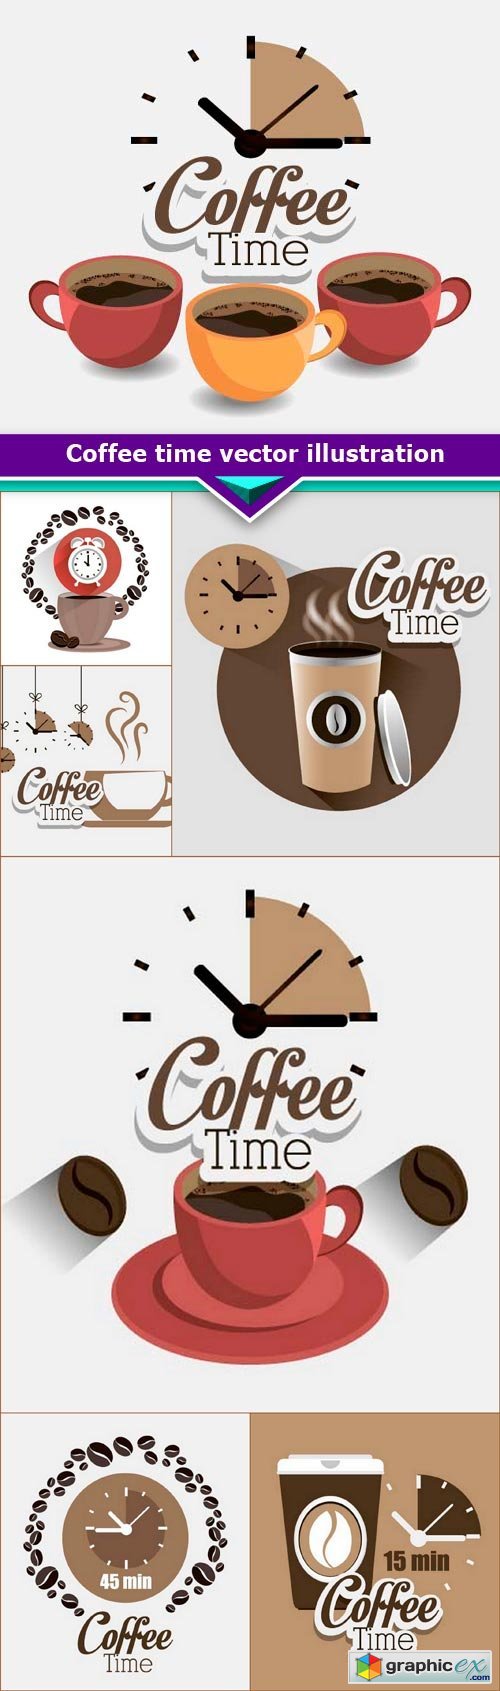 Coffee time vector illustration 7x EPS